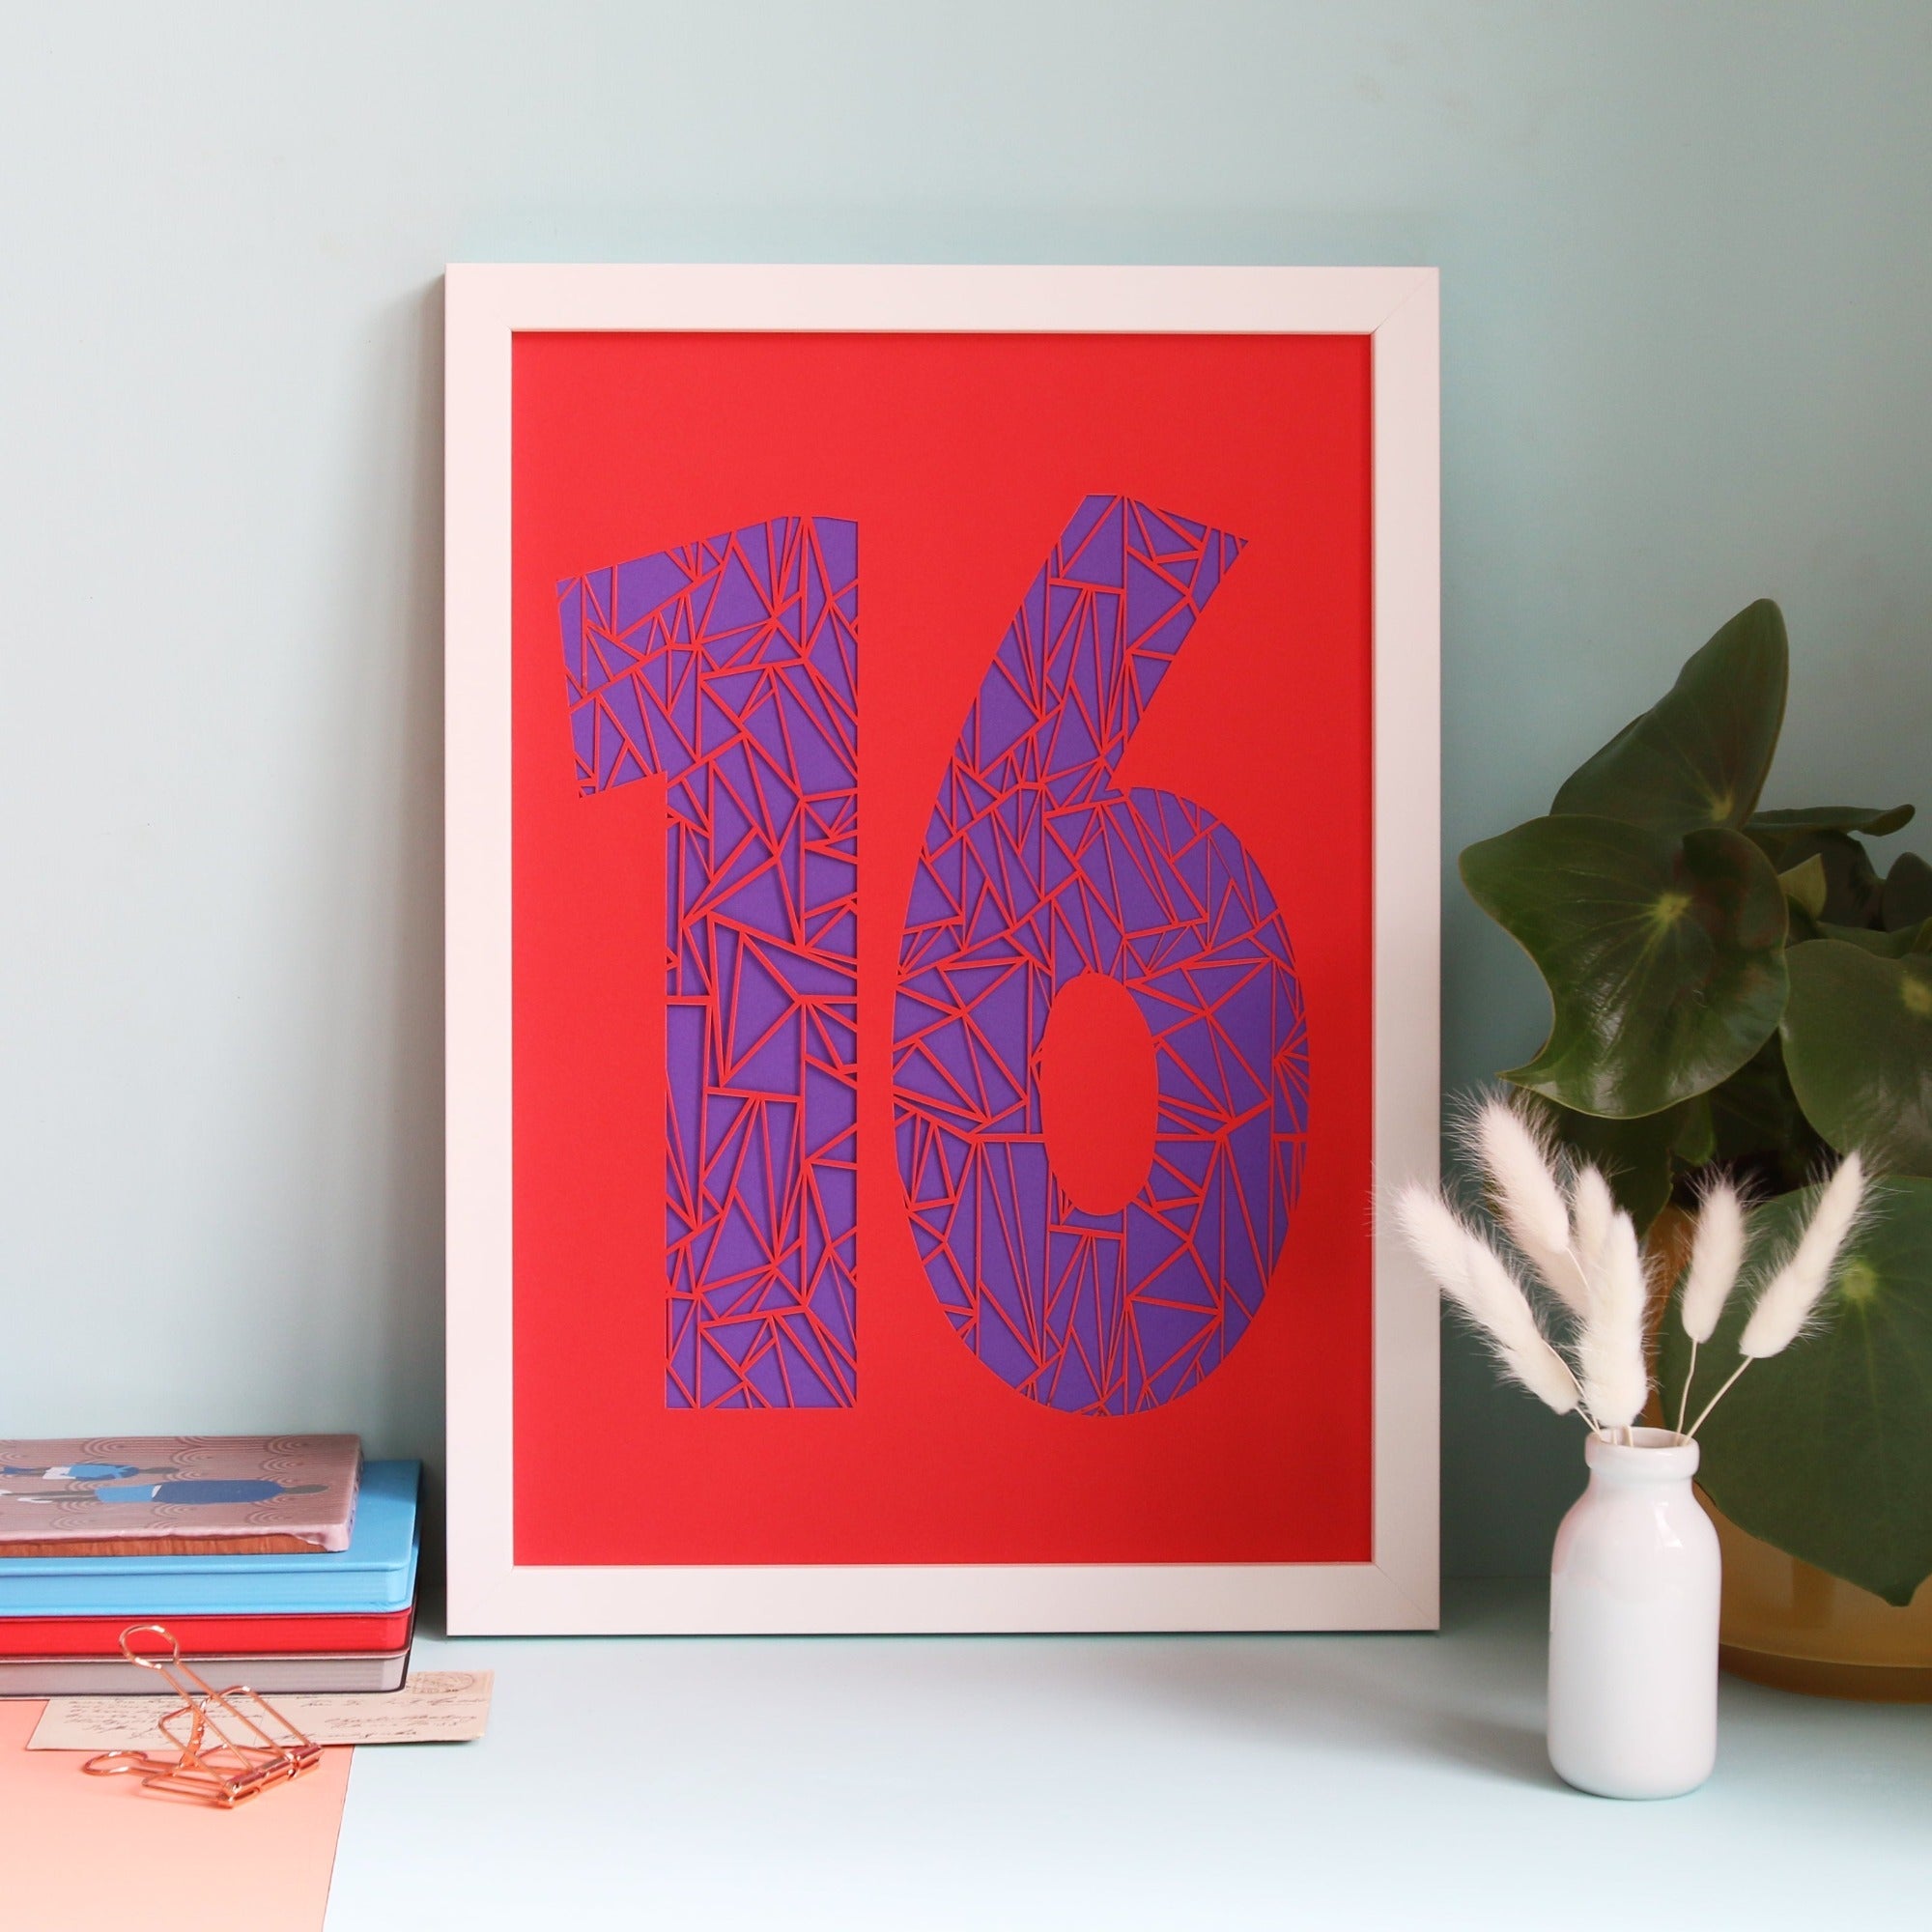 Bright red papercut of the number 16 with a purple background.